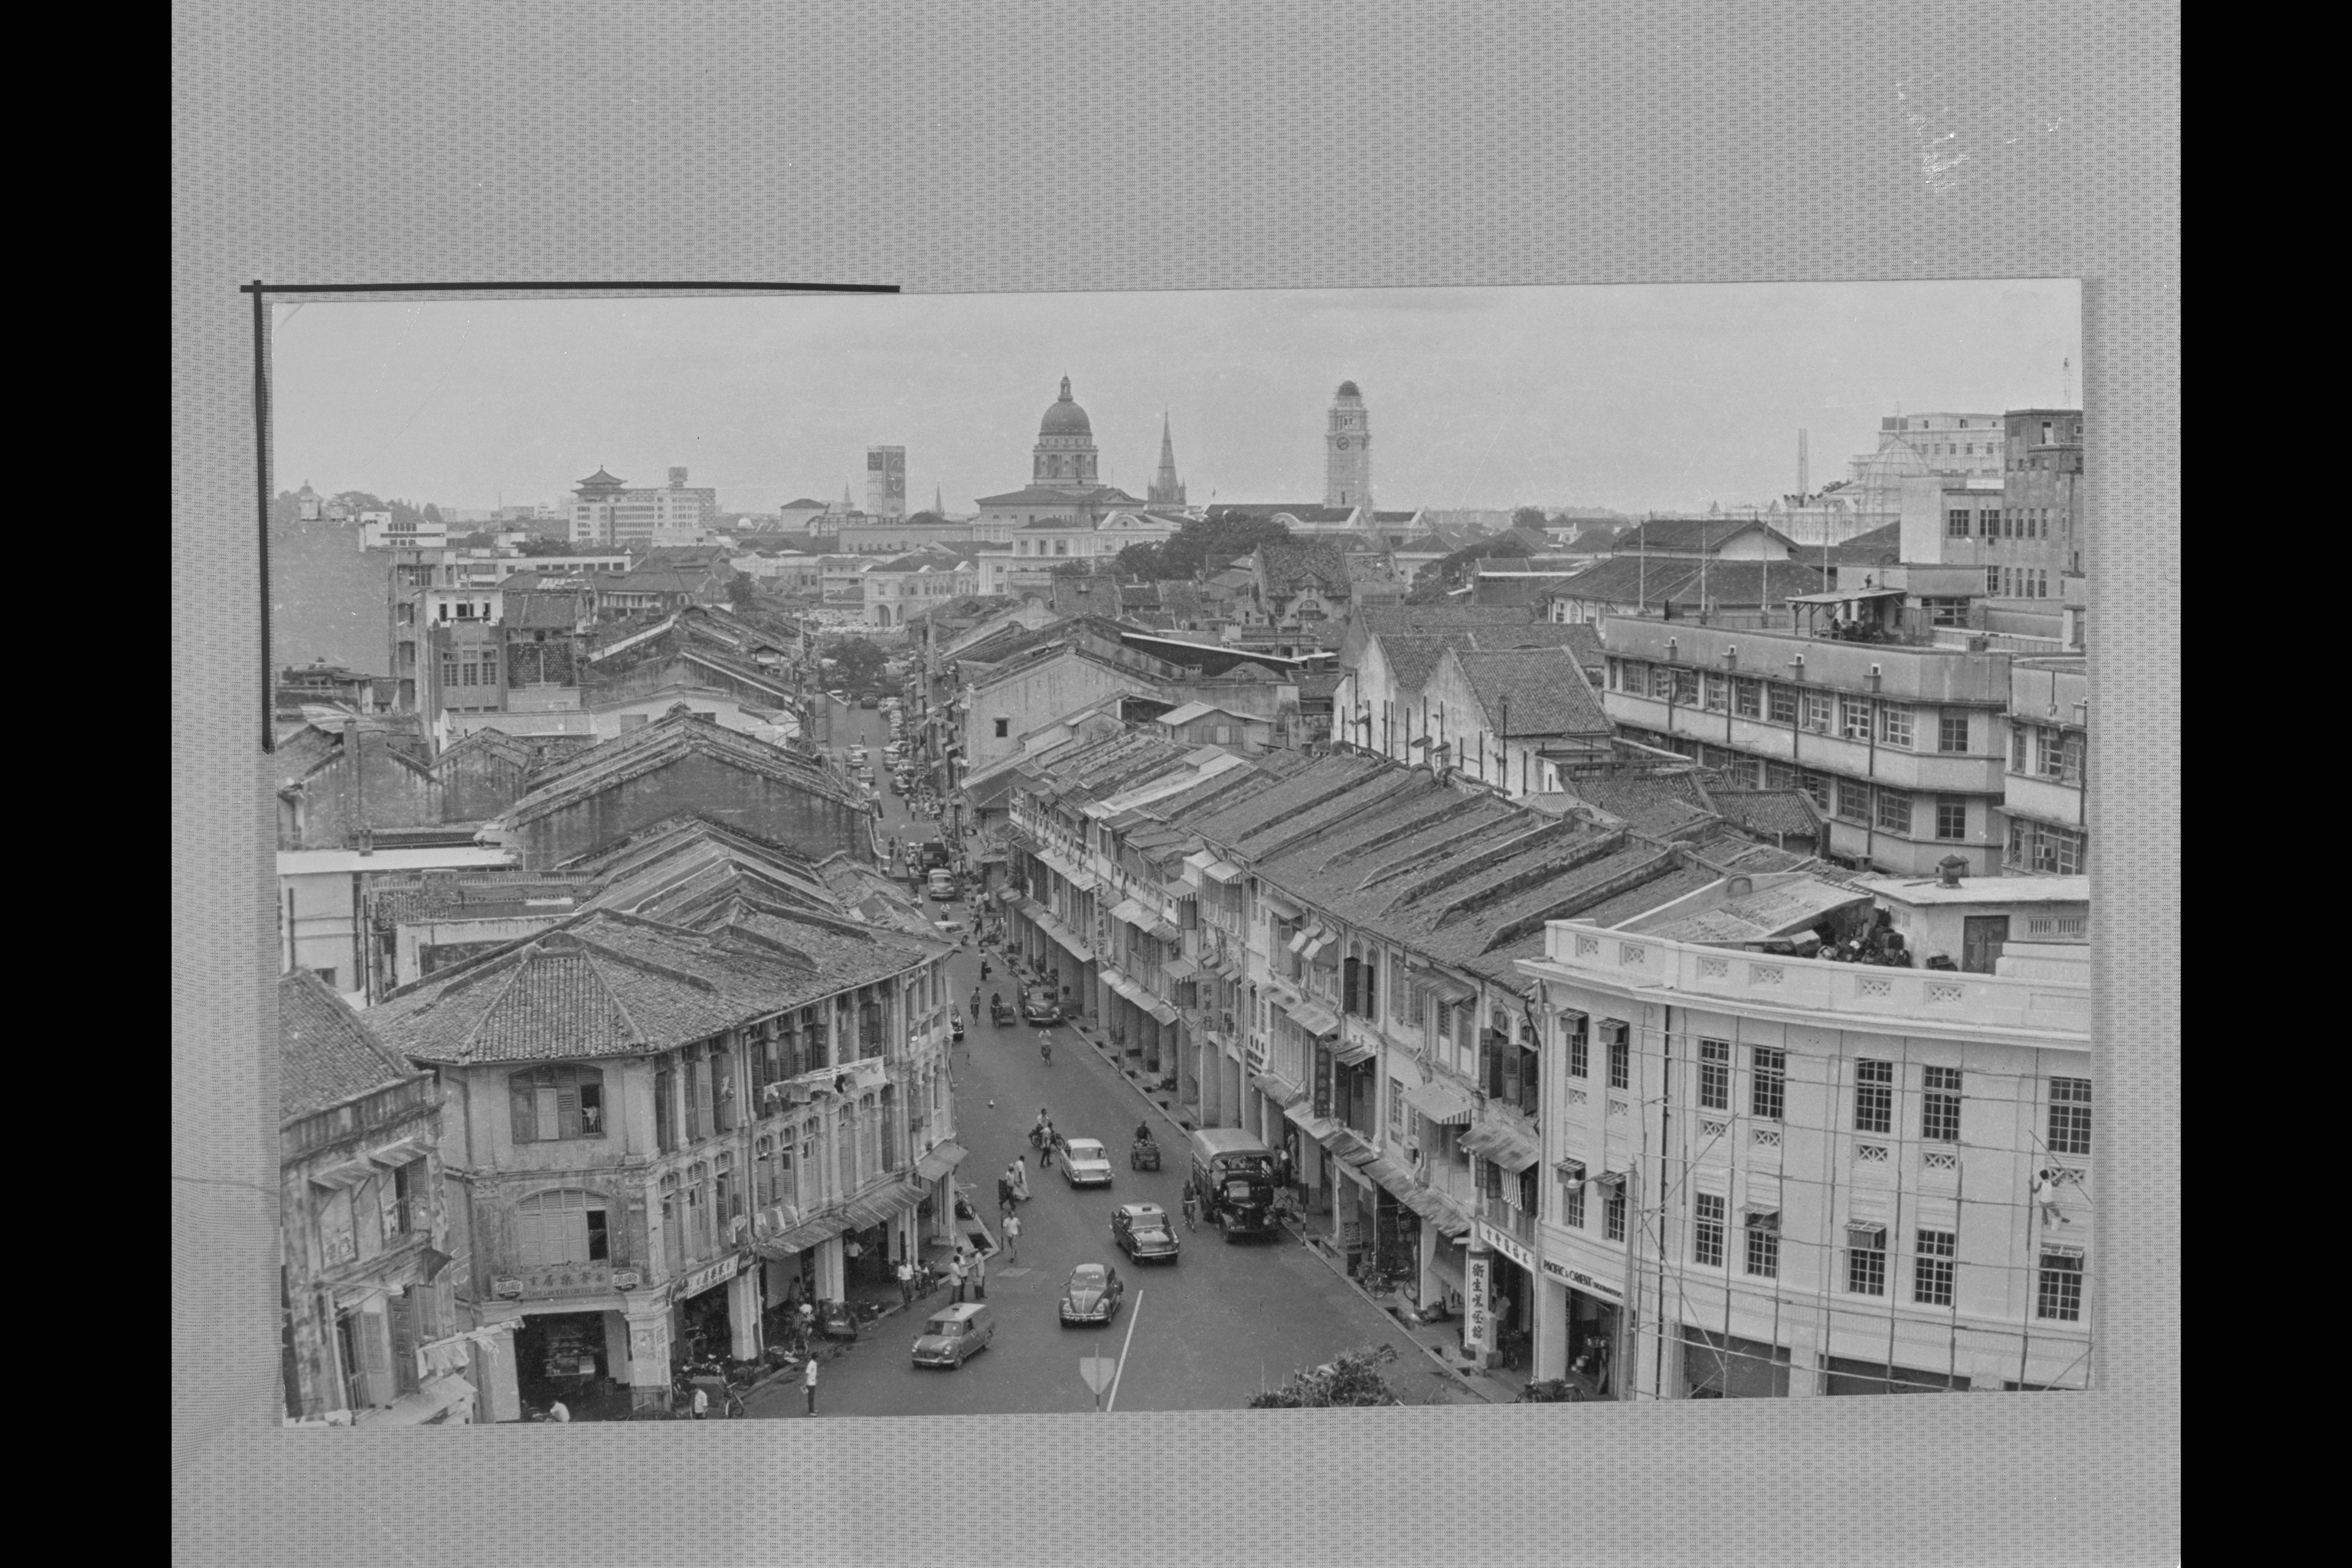 Market Street in the 1970s. Chu Sui Mang Collection, courtesy of National Archives of Singapore